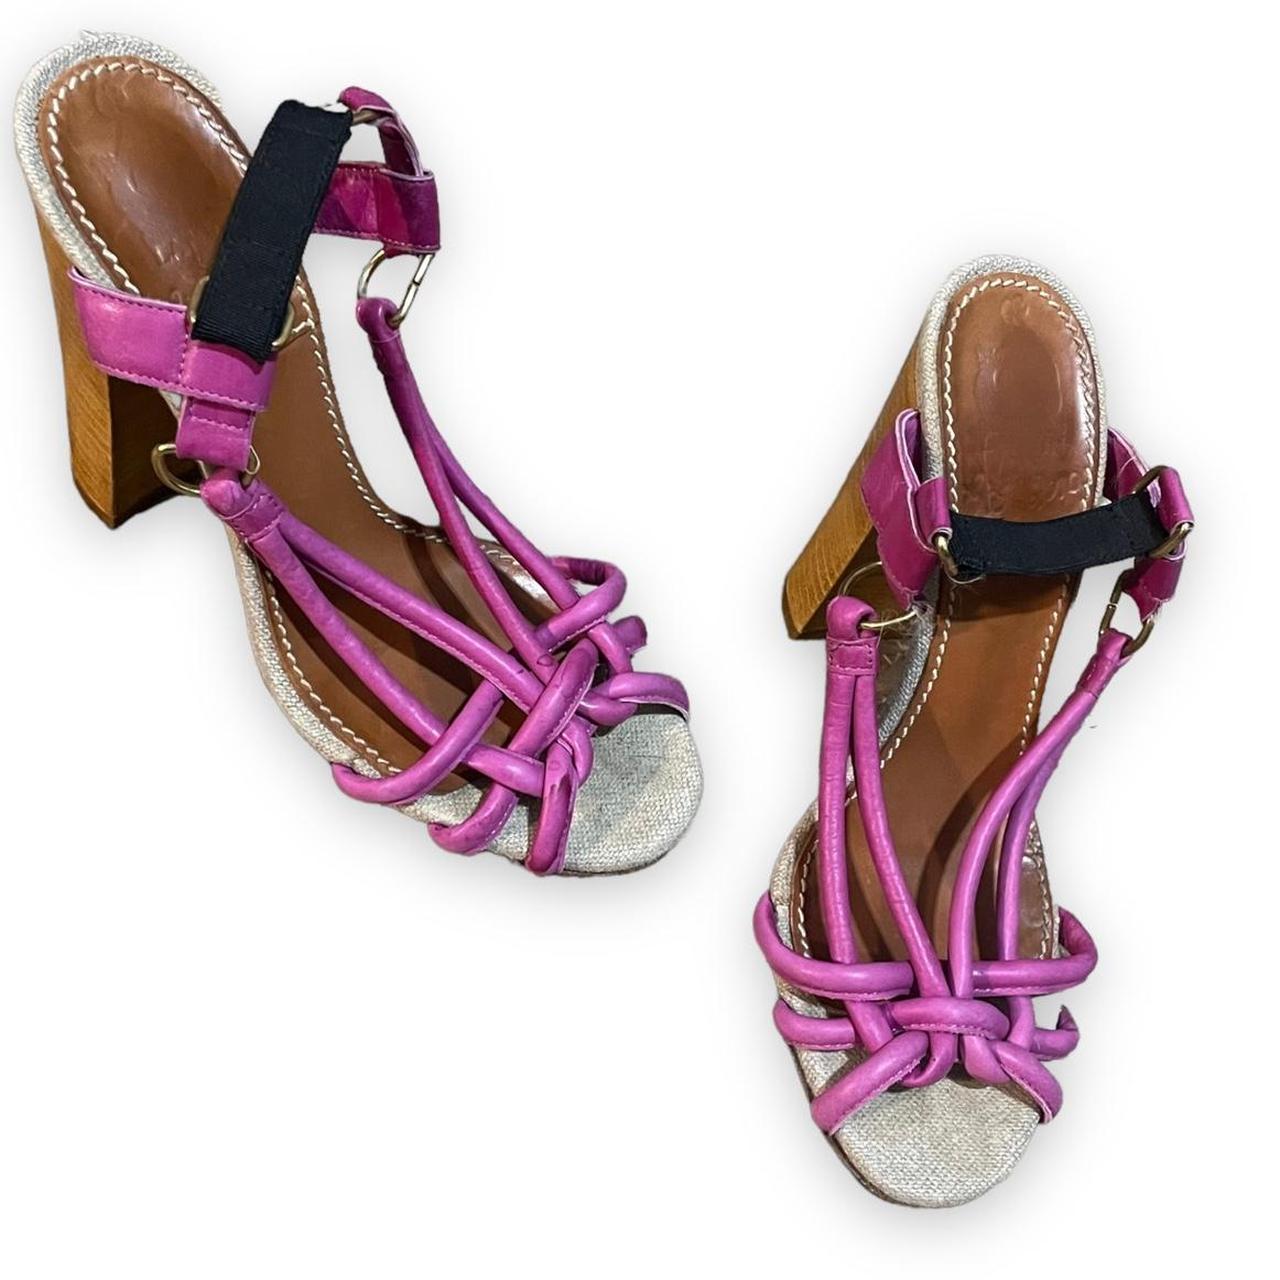 Lanvin Women's Pink and Tan Sandals